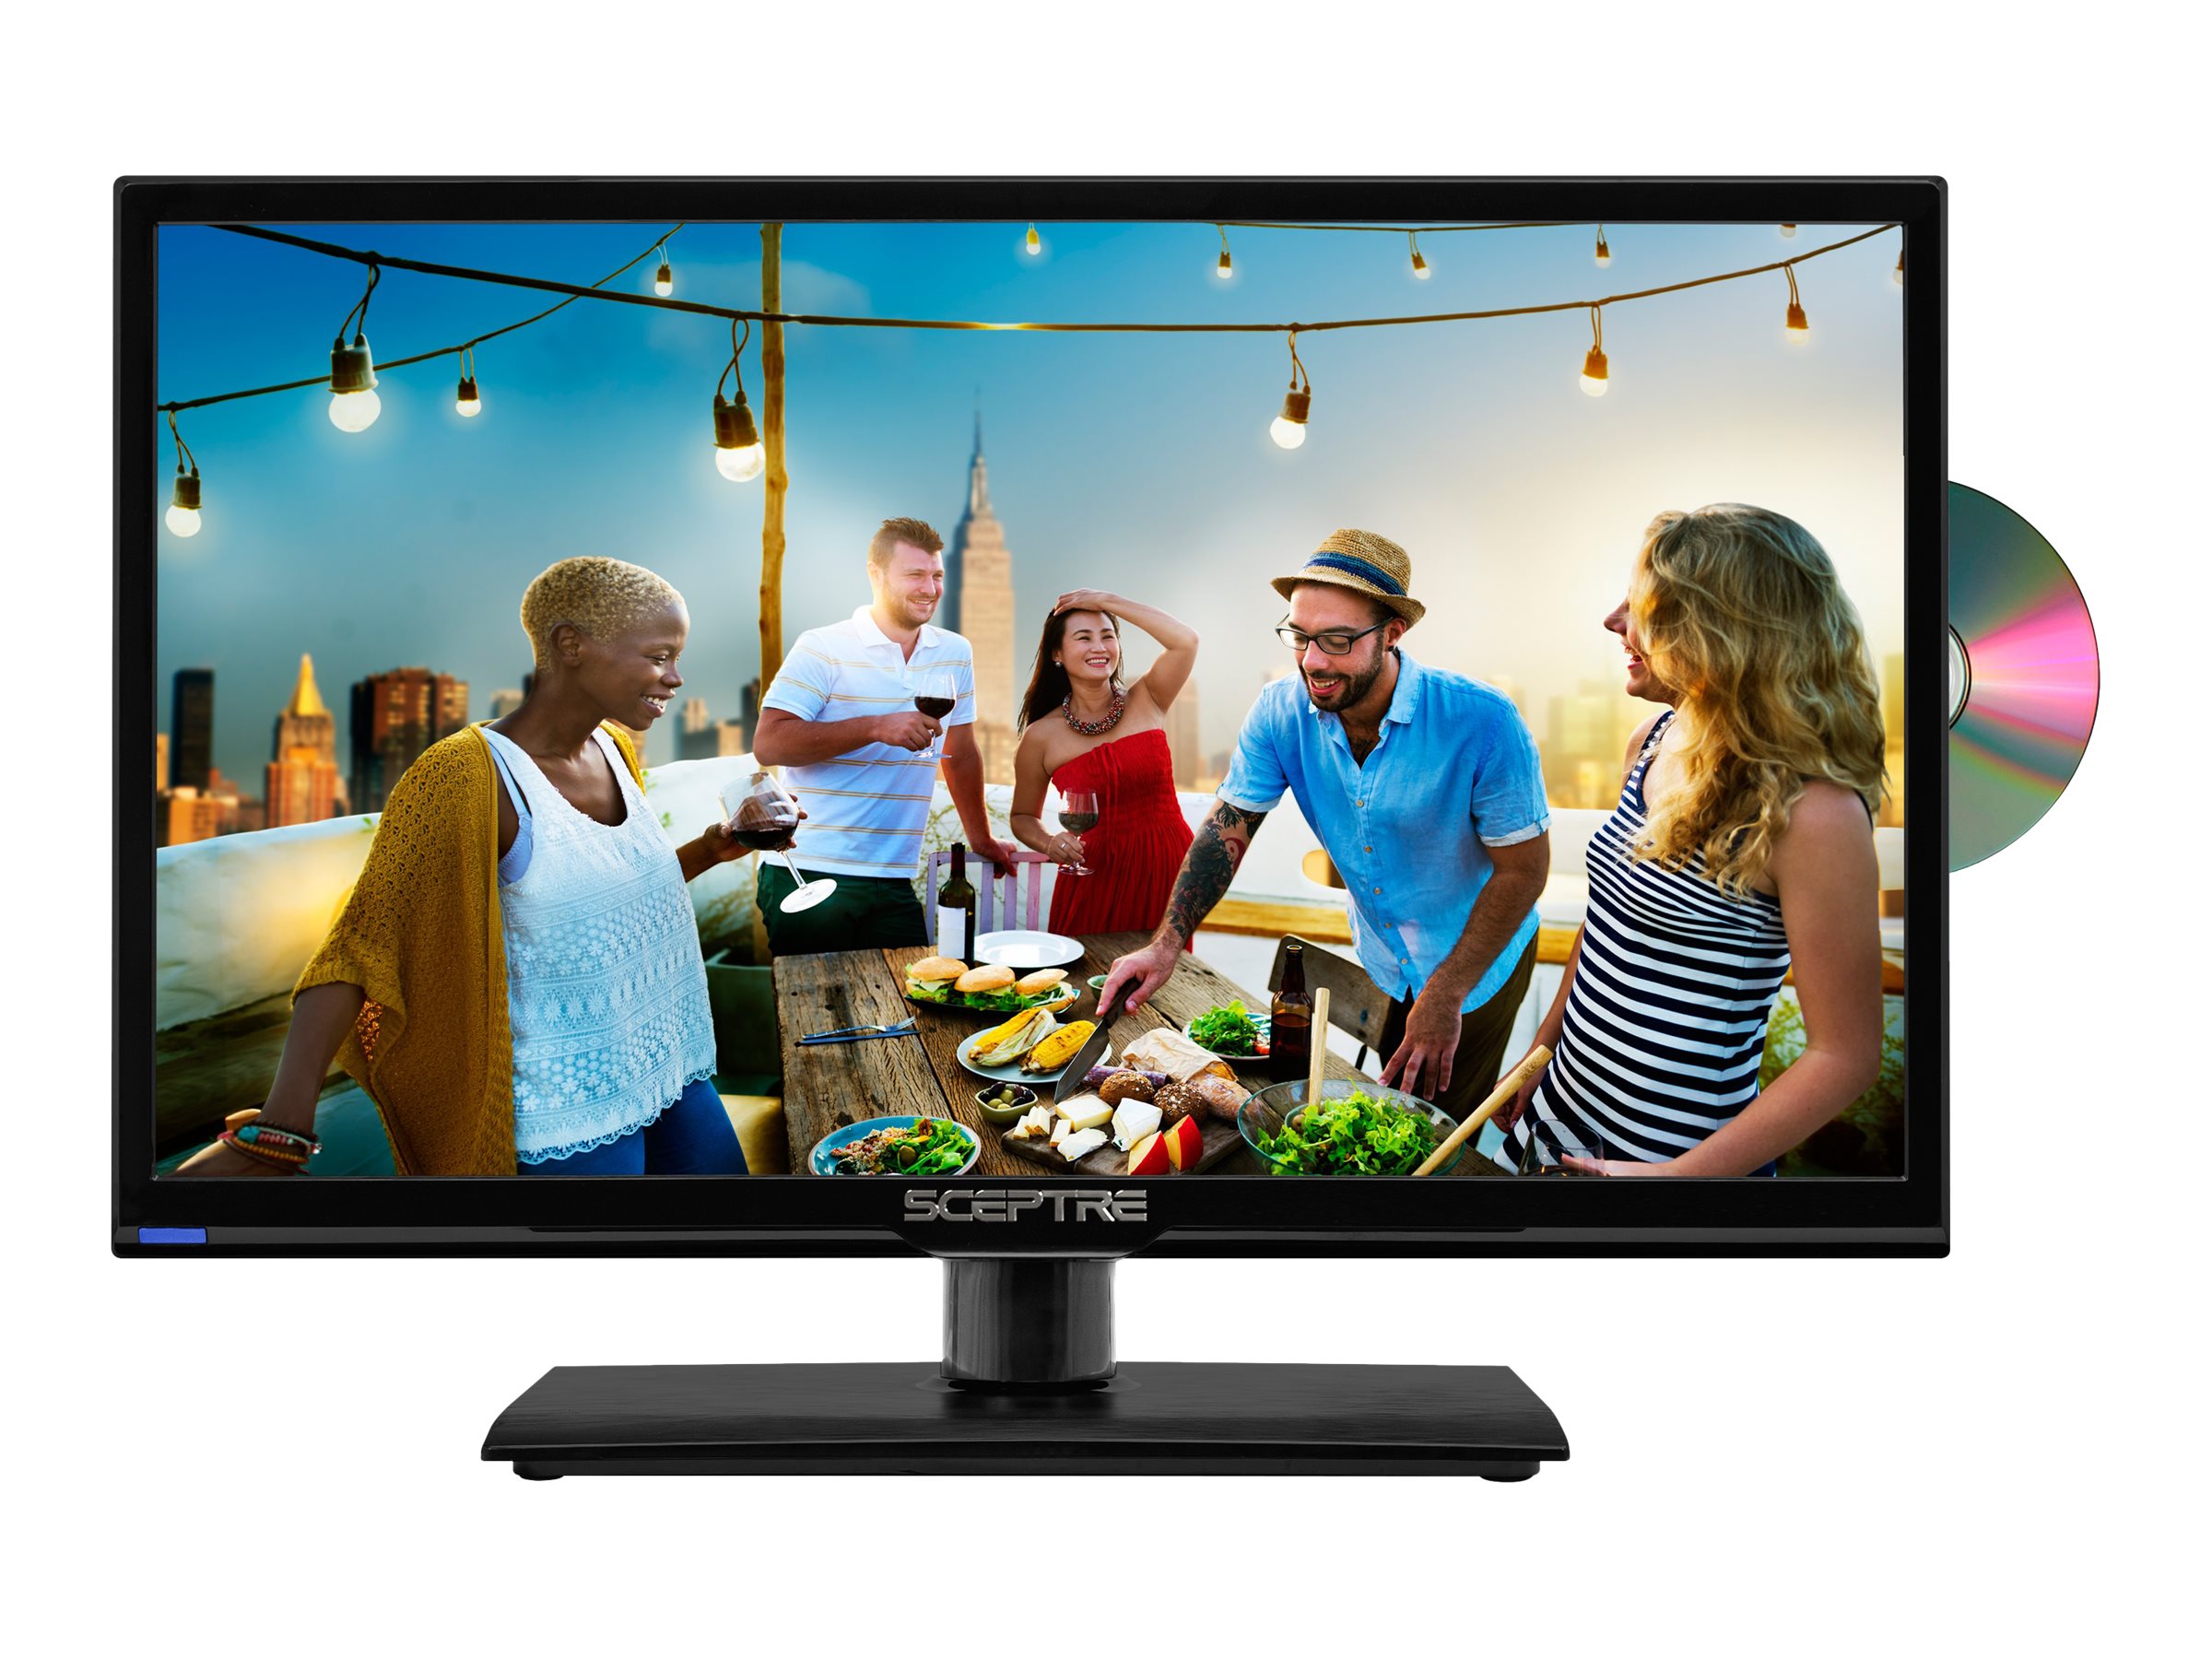 Sceptre E205BD-SMQC - 20" Diagonal Class (19.5" viewable) LED-backlit LCD TV - with built-in DVD player - 720p 1366 x 768 - image 1 of 7